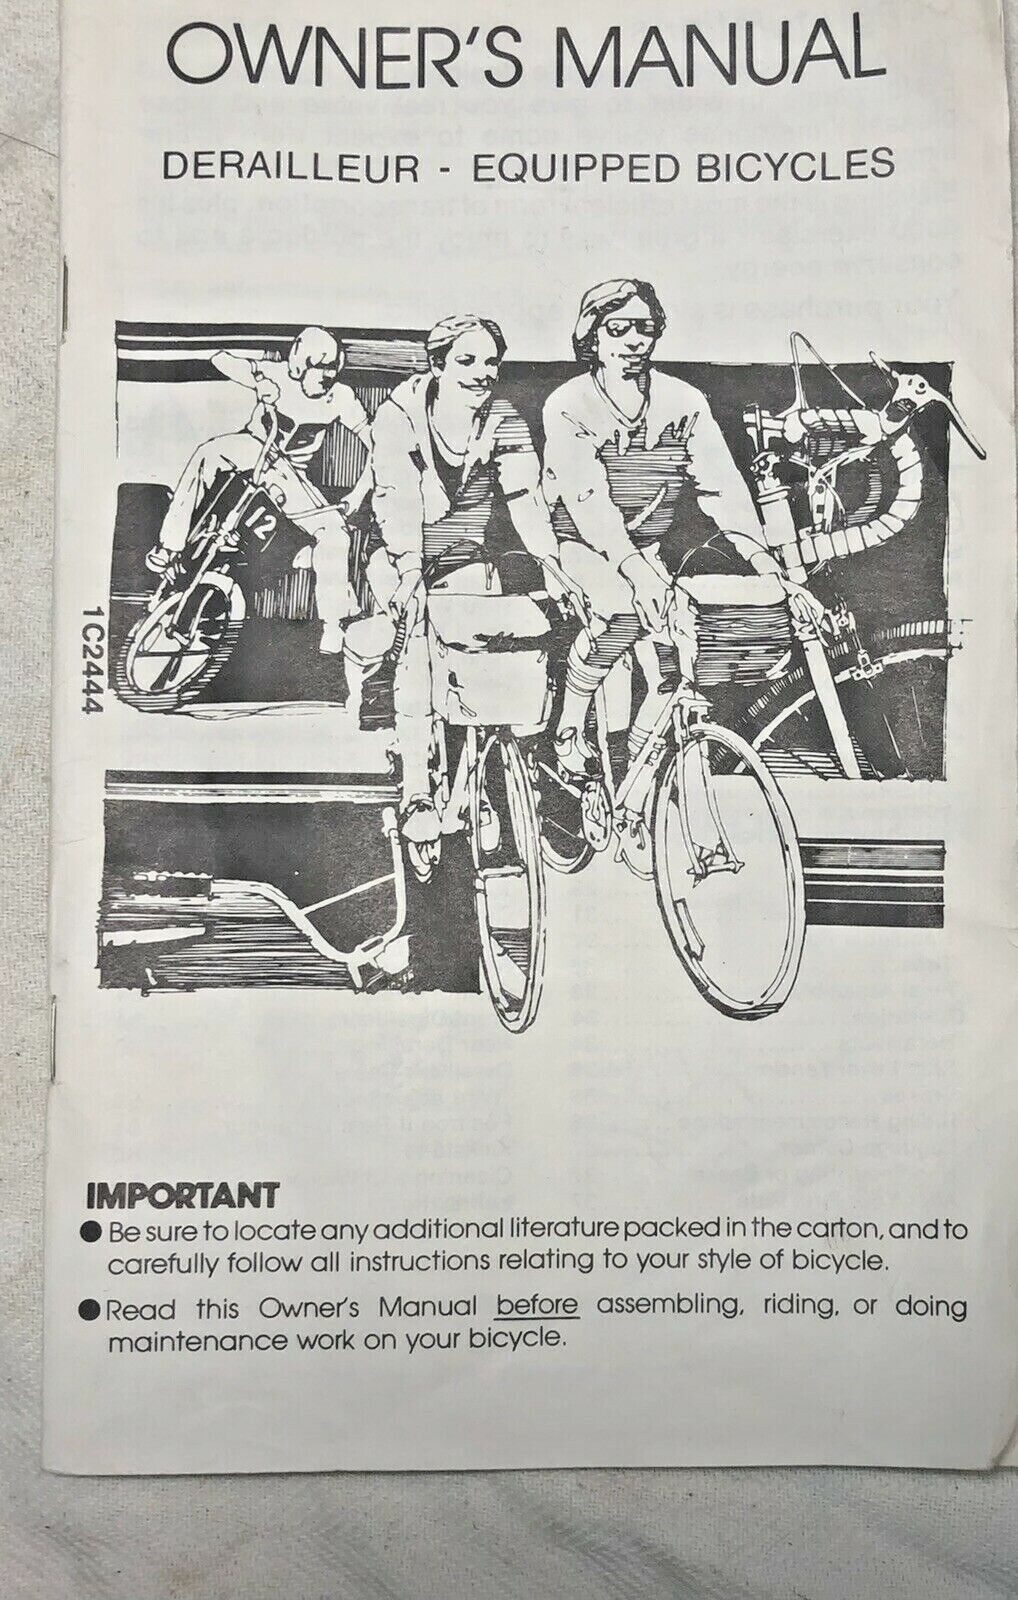 1984 Huffy Owner\'s Manual for Derailleur Equipped Bicycles Vintage Bike Cycling